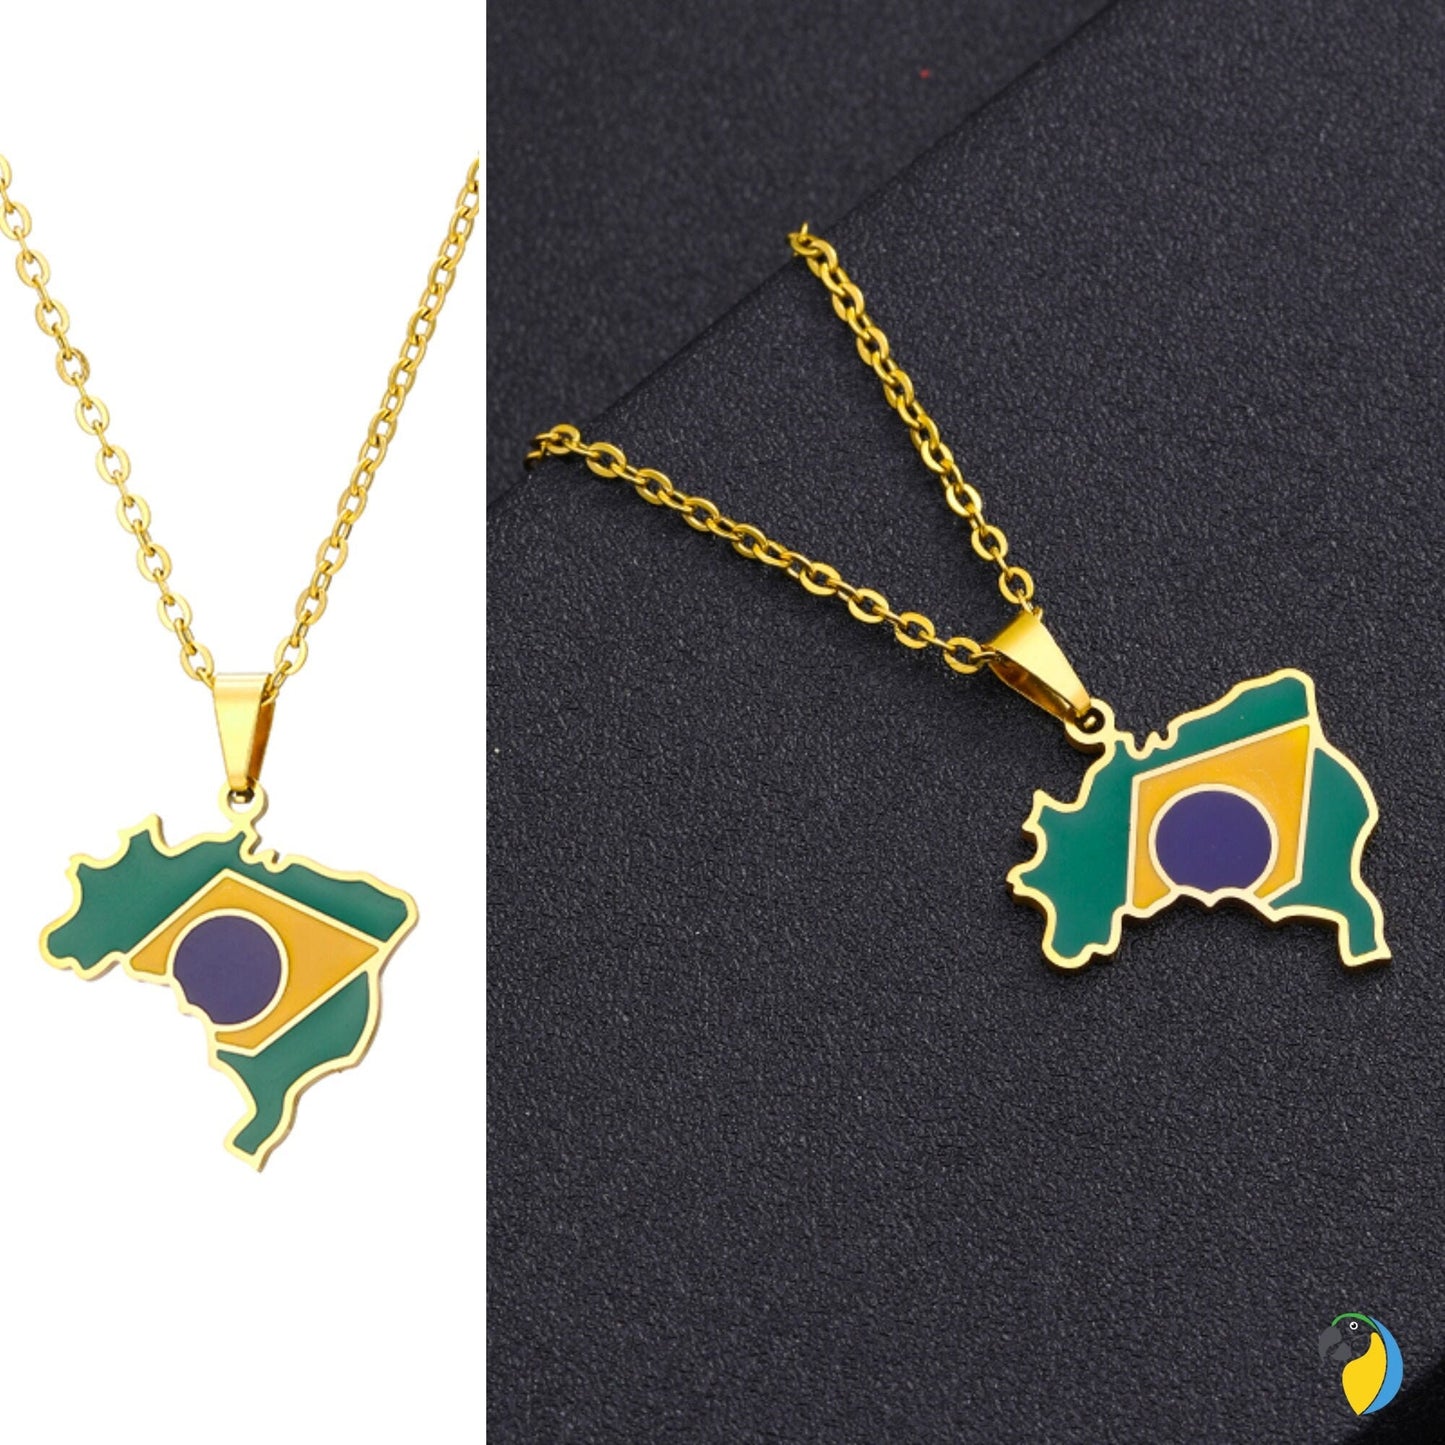 Brazil Map Necklace | Silver Or Gold-Plated Stainless Steel Pendant Of Brazilian National Flag | South American Jewelry Gift For Sports Fan | Papagaio Studio Etsy Shop